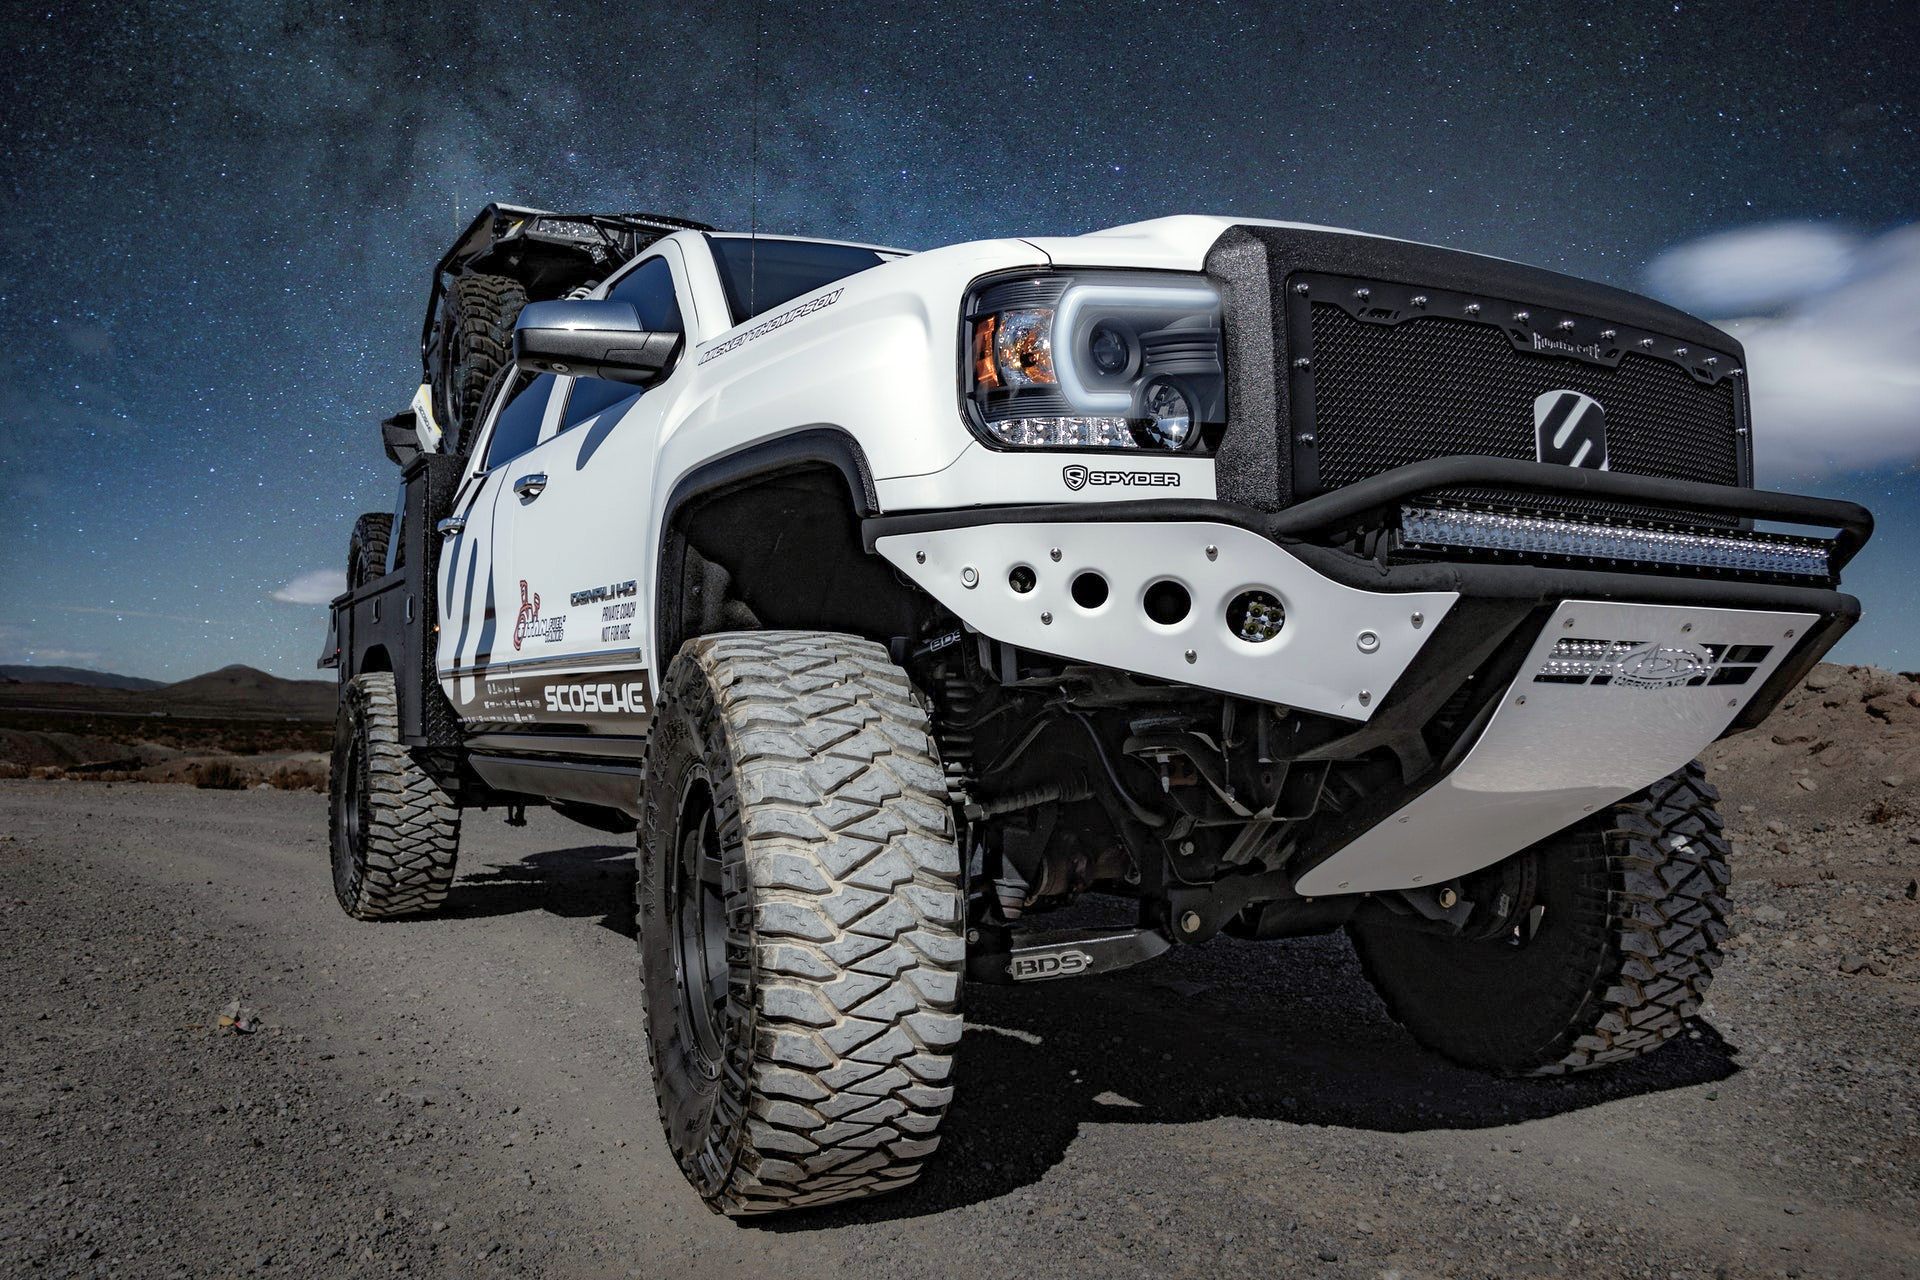 Awesome Lifted Truck Wallpaper 1920x1280p 65r18 Cooper Discoverer At3 4s 114t